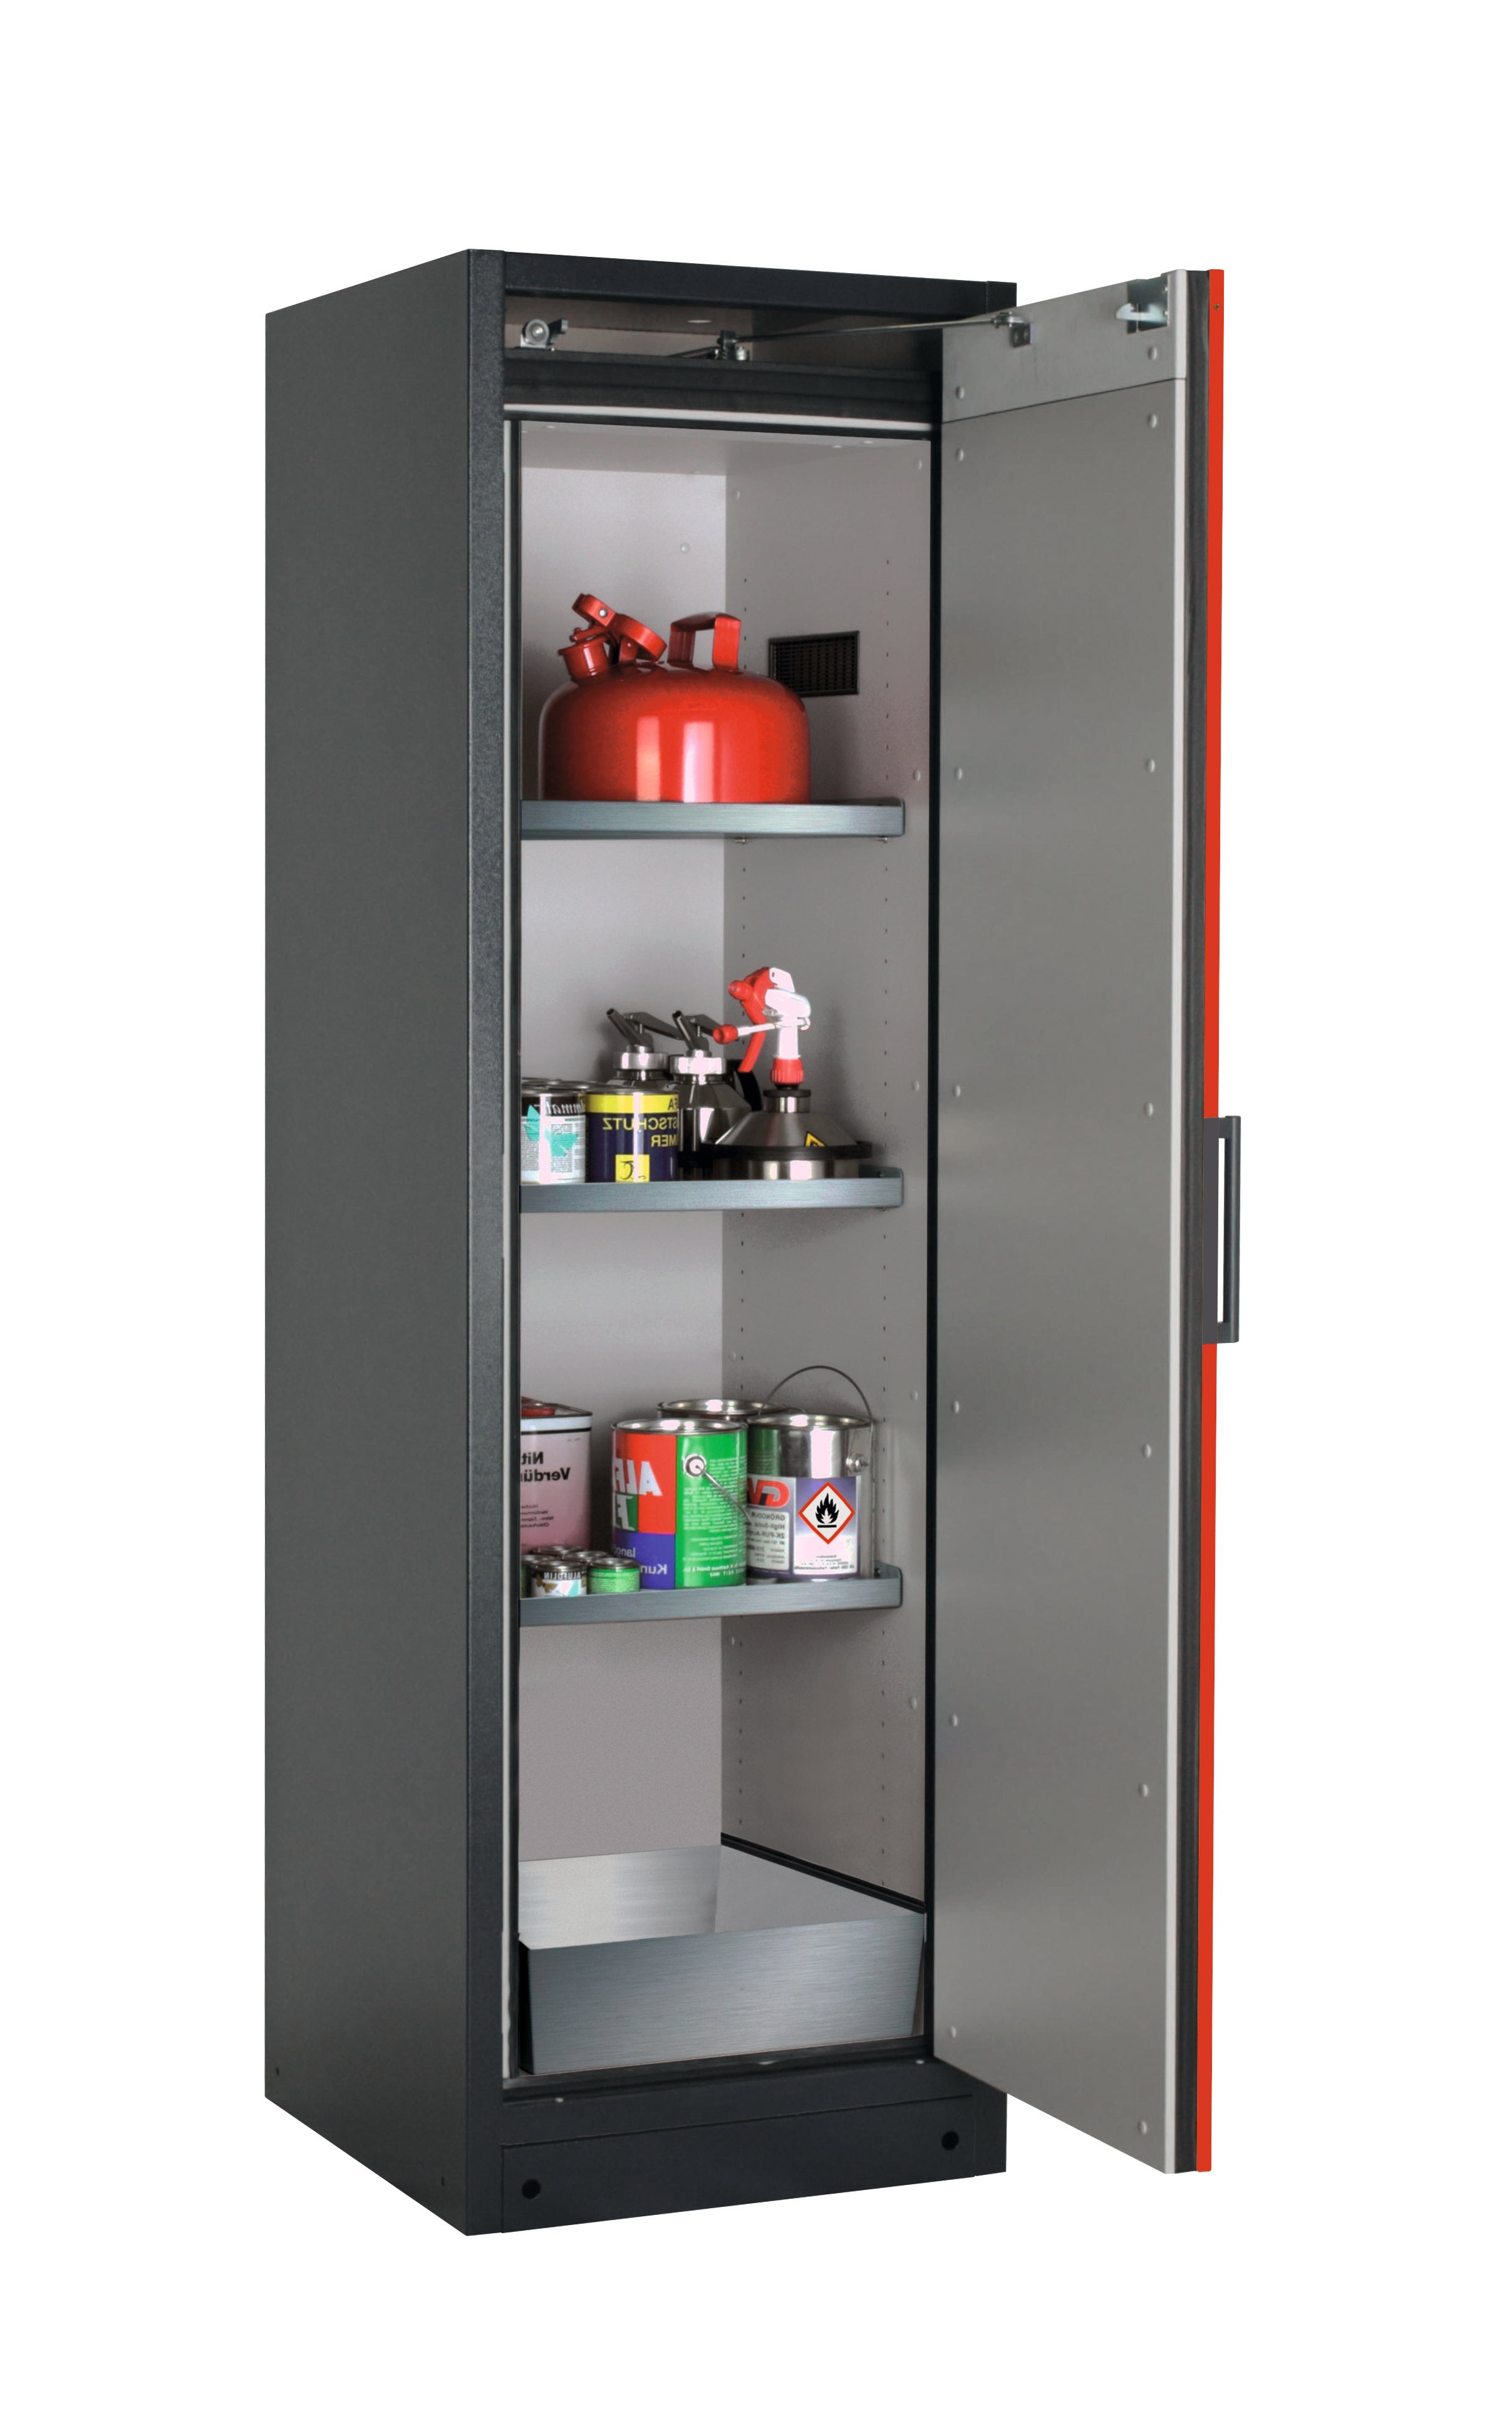 Type 90 safety storage cabinet Q-PEGASUS-90 model Q90.195.060.WDACR in traffic red RAL 3020 with 3x shelf standard (stainless steel 1.4301),